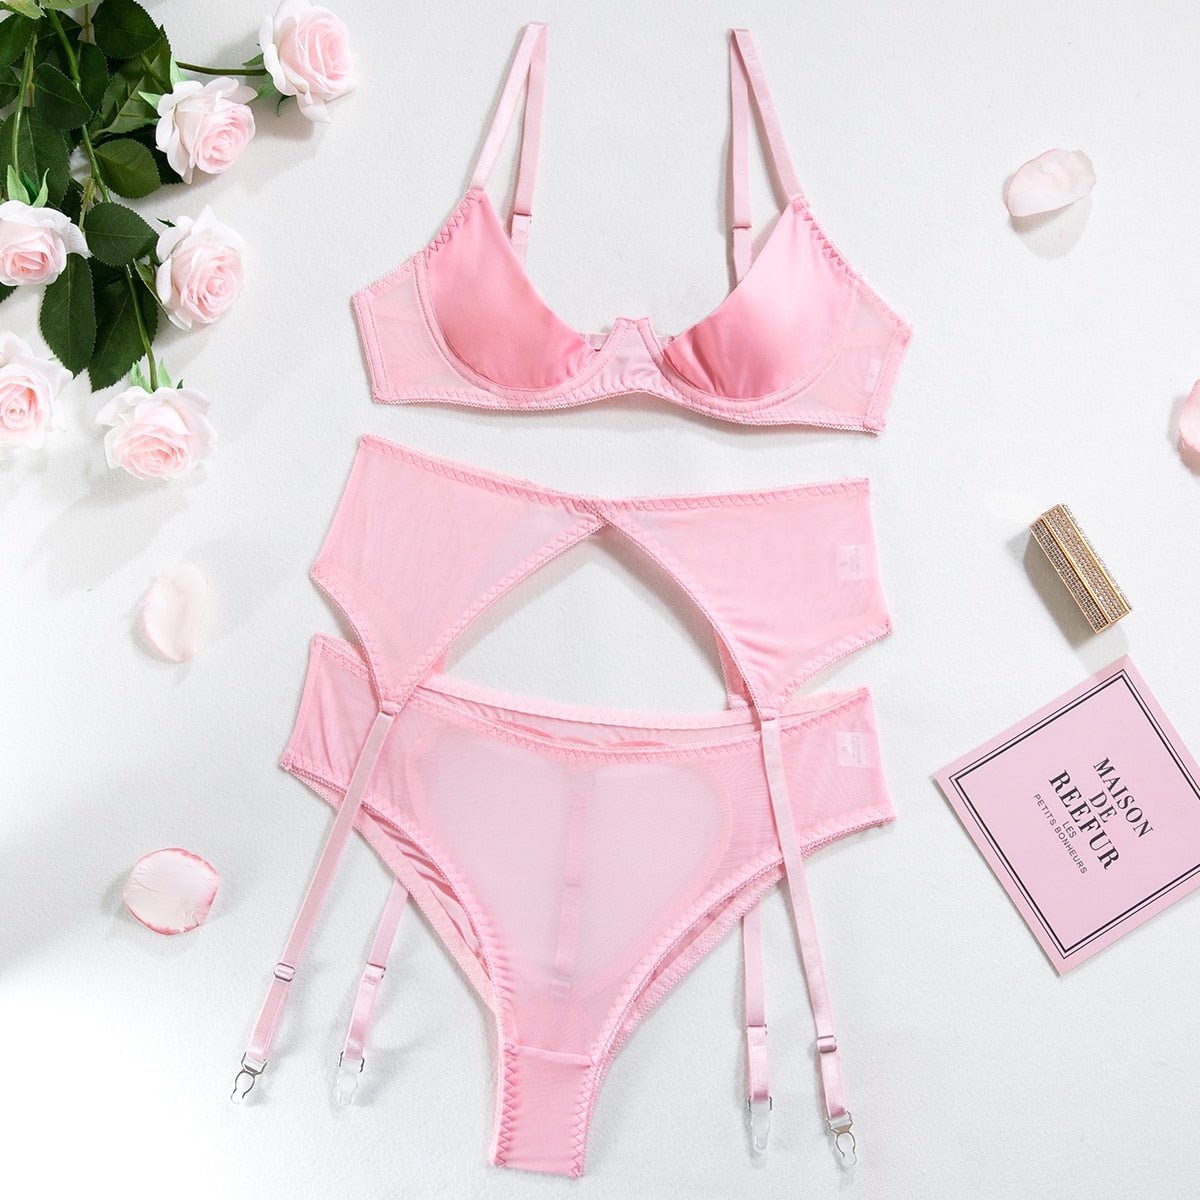 Delicate and Dreamy: A Pastel Lingerie Set - MSO ONLINE